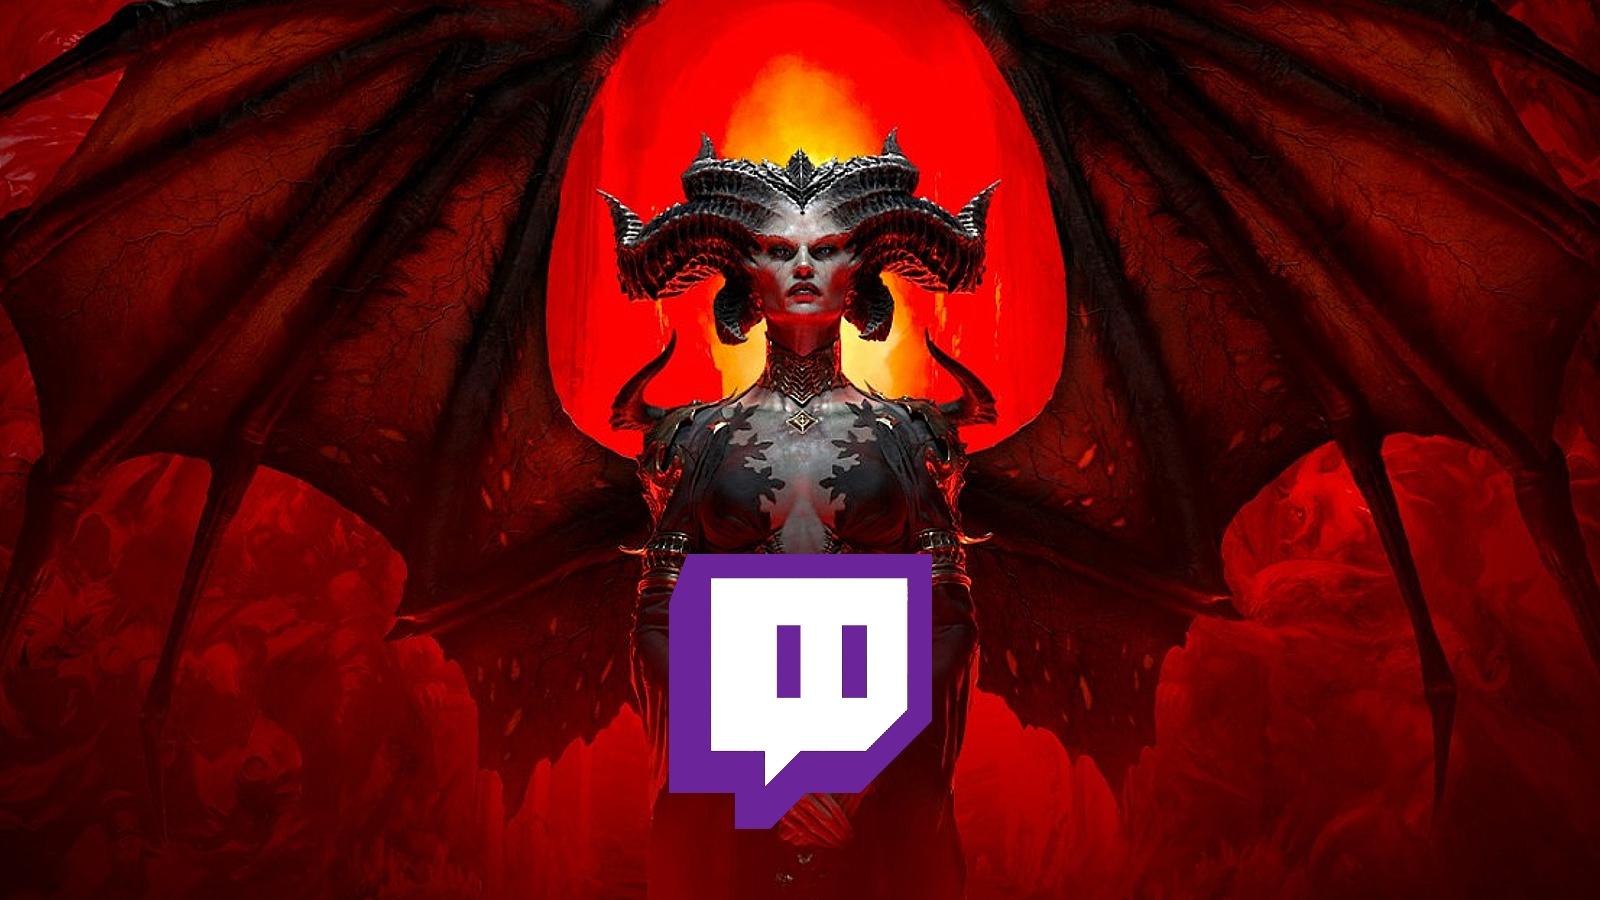 Diablo 4 art with Twitch logo in the middle